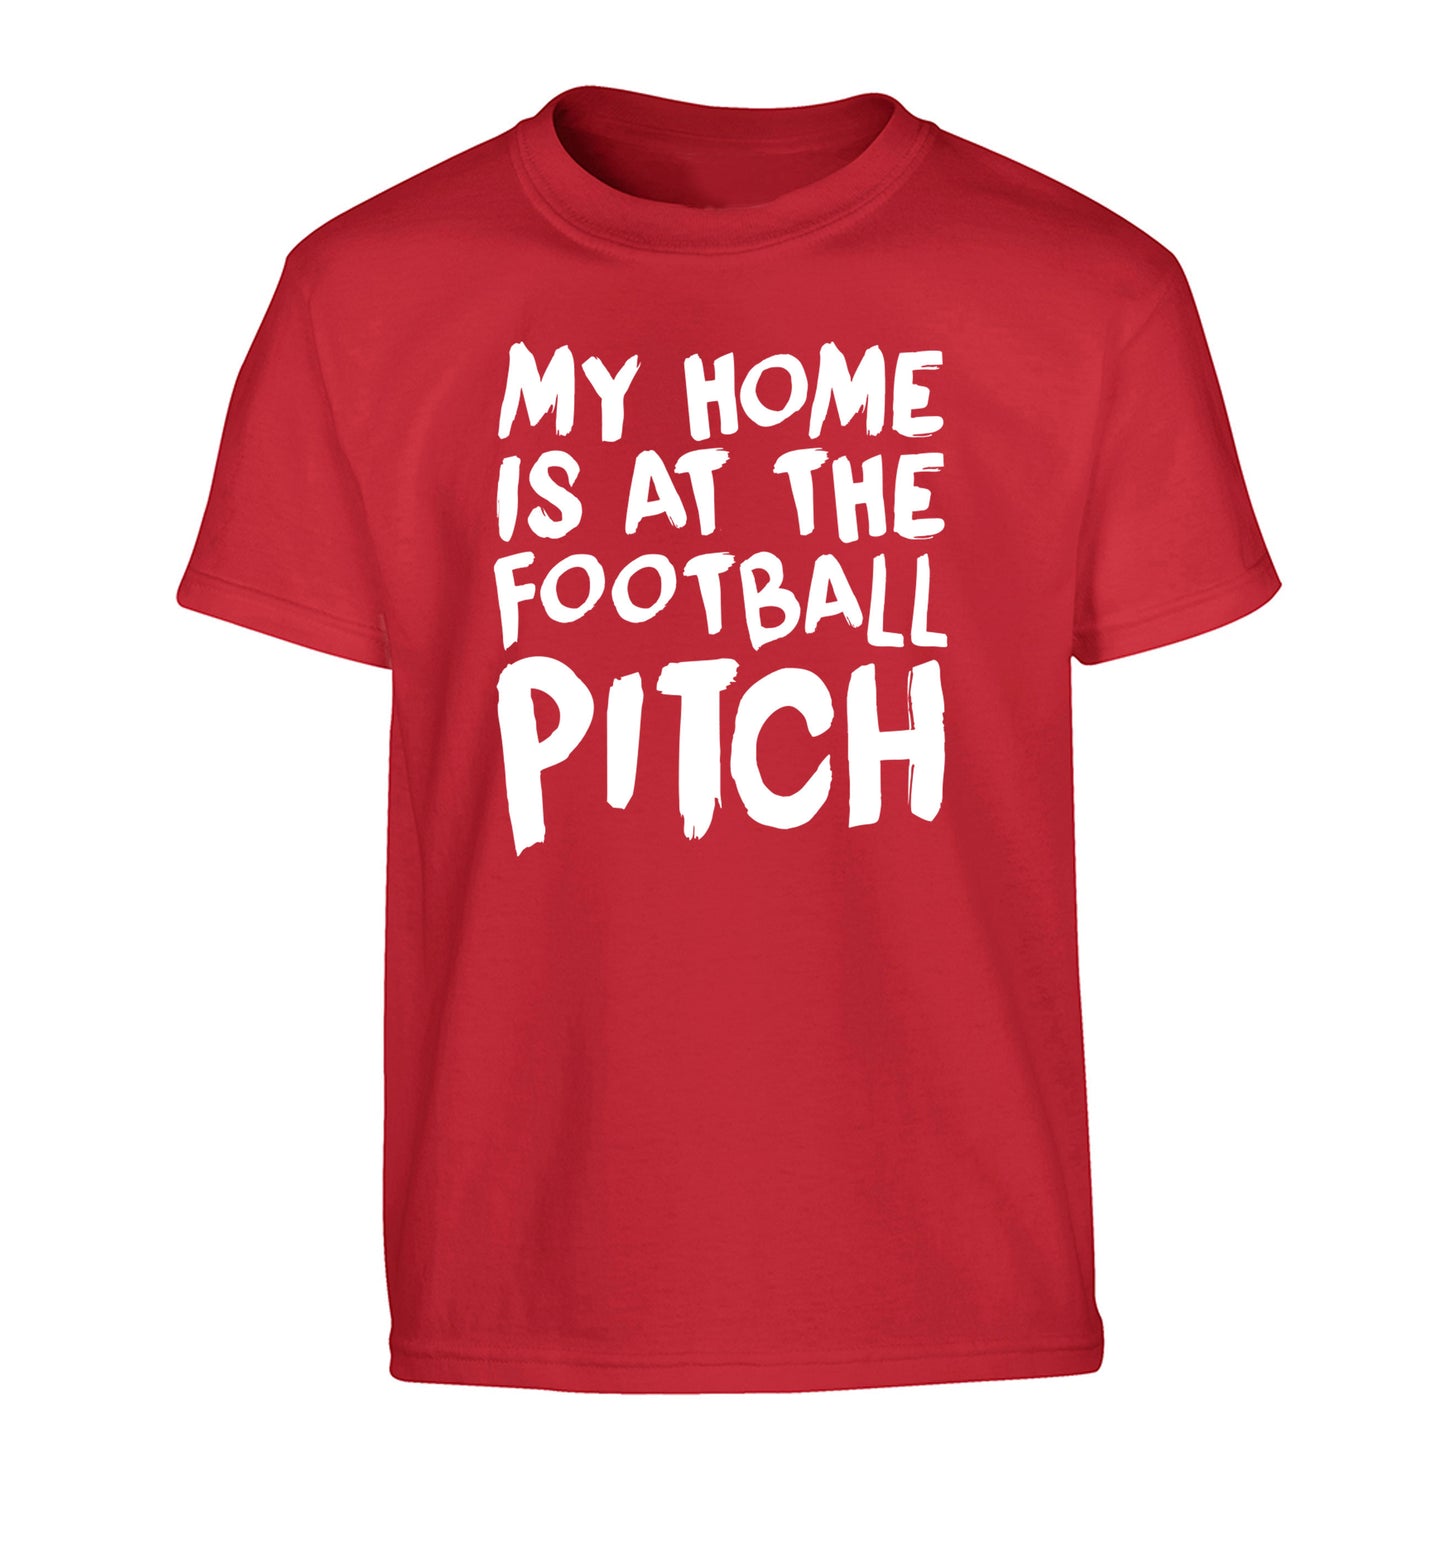 My home is at the football pitch Children's red Tshirt 12-14 Years